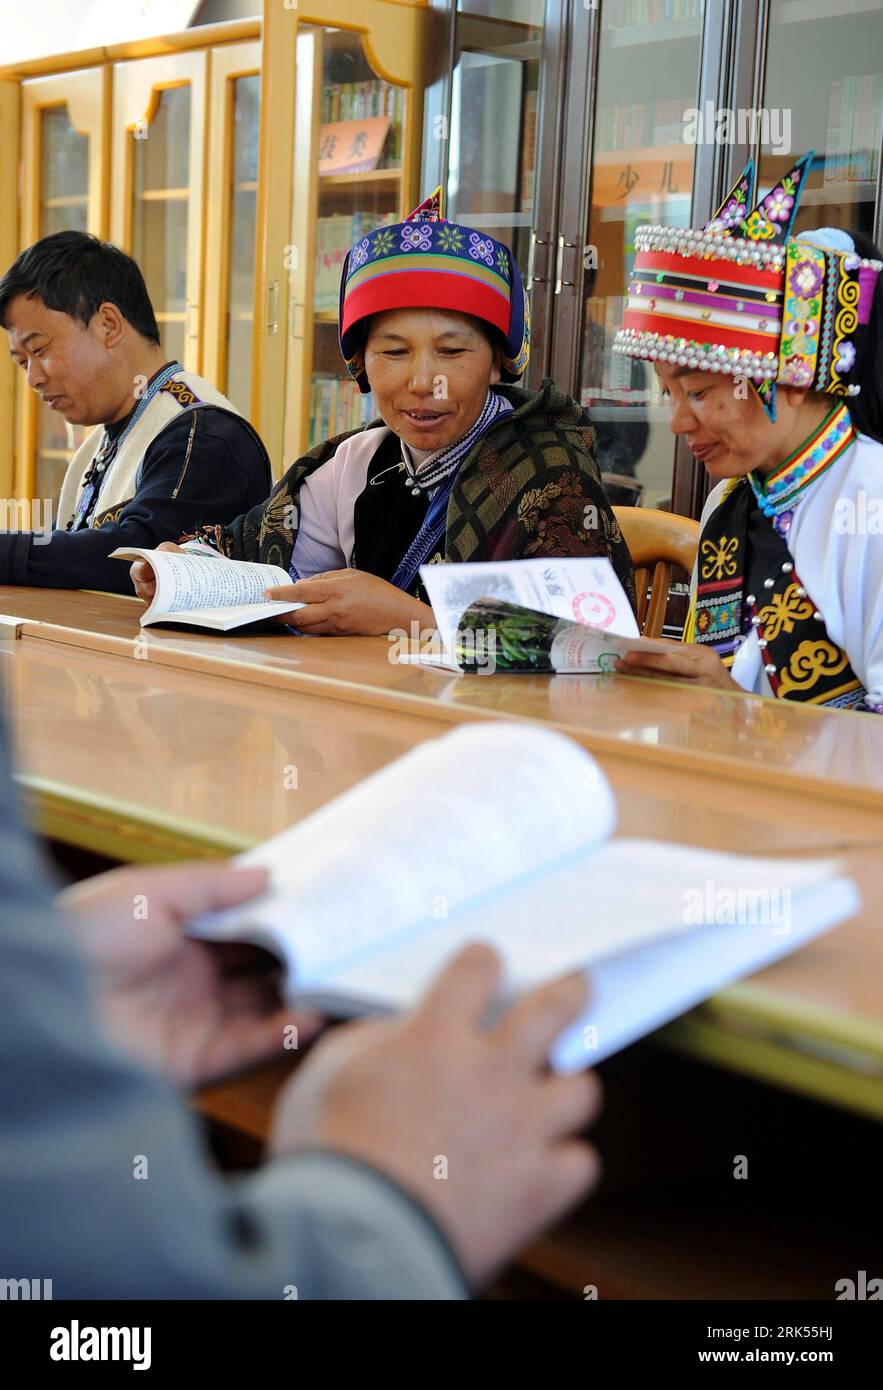 Bildnummer: 53704251  Datum: 05.01.2010  Copyright: imago/Xinhua (100105) -- KUNMING, Jan. 5, 2010 (Xinhua) -- Farmers of ethnic Yi nationality read in a readingroom in their village in Shilin Yi Autonomous County, southwest China s Yunnan Province, Jan. 5, 2010. A total of 2,032 village roeadingrooms have been set up in the province by the end of 2009. The readingrooms funded by the local government provids reading spaces and free book lending services to the local villages. (Xinhua/Ling Yiguang)(dyw) (2)CHINA-KUNMING-VILLAGE READINGROOMS (CN) PUBLICATIONxNOTxINxCHN Land Leute Lesen kbdig xsk Stock Photo